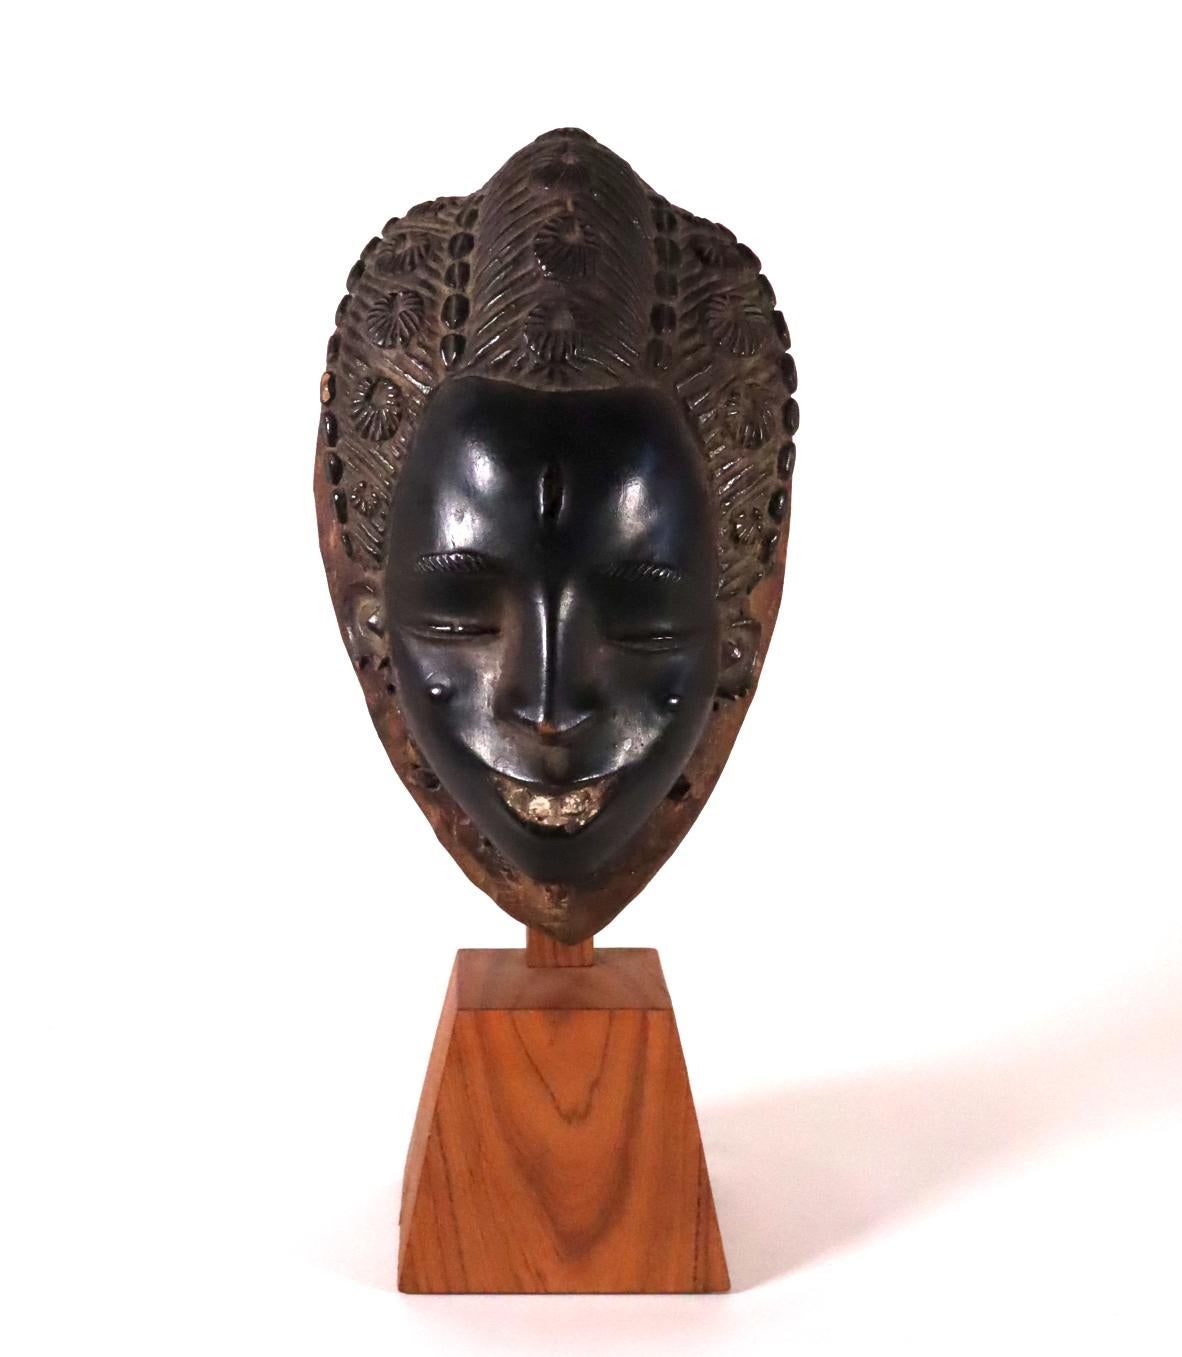 A beatific face mask from the Guro people of the Cote d'Ivoire (Ivory Coast). Wood with paint and white pigment at the mouth. Possibly created by a known 20th century carver, but no provenance can be traced.
One of the main ancestral female